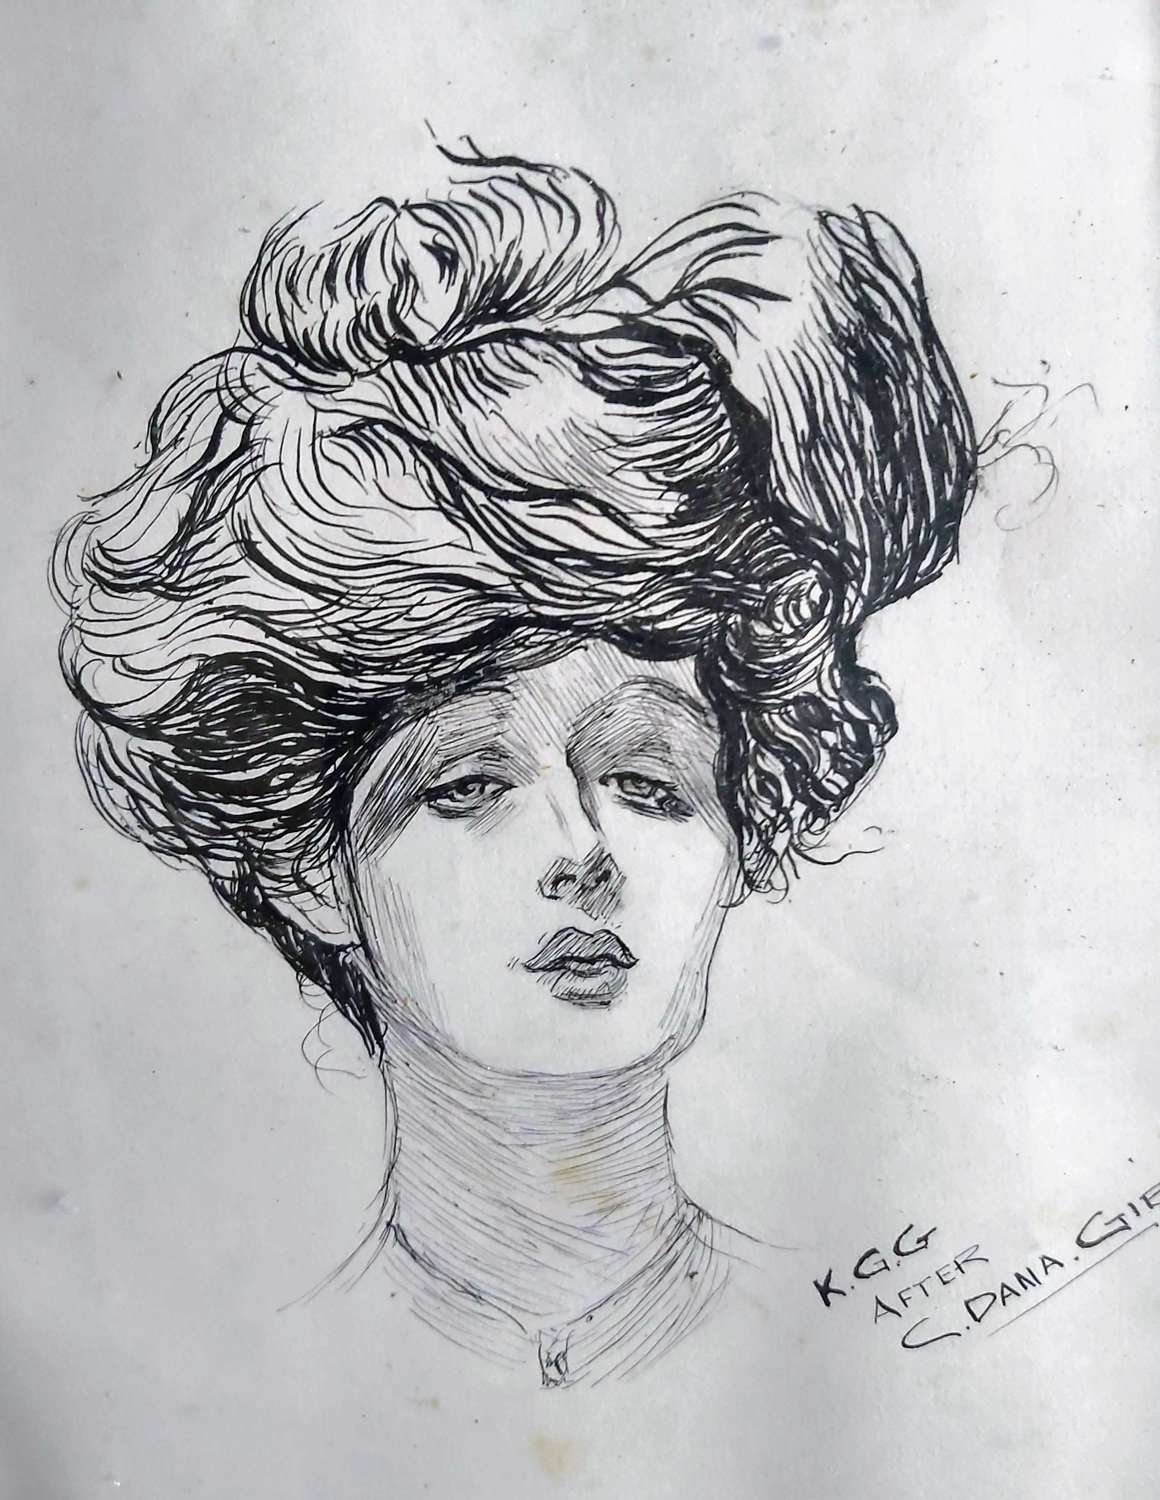 Early 20th Century Pen and Ink Drawing after Charles Dana Gibson